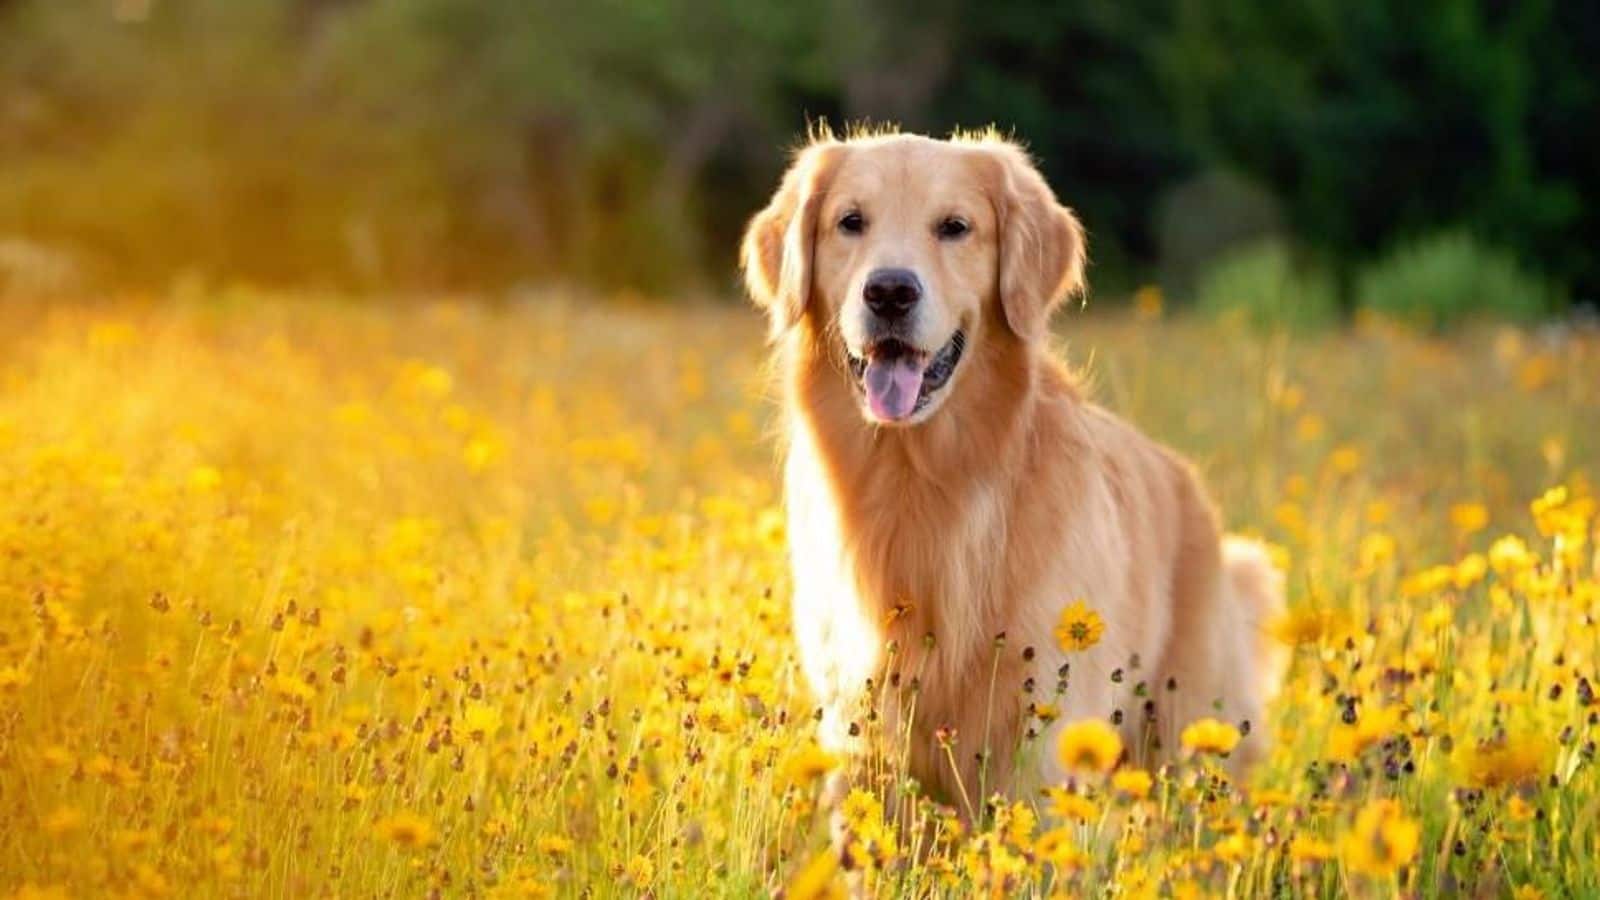 Take note of these Golden Retriever training tips